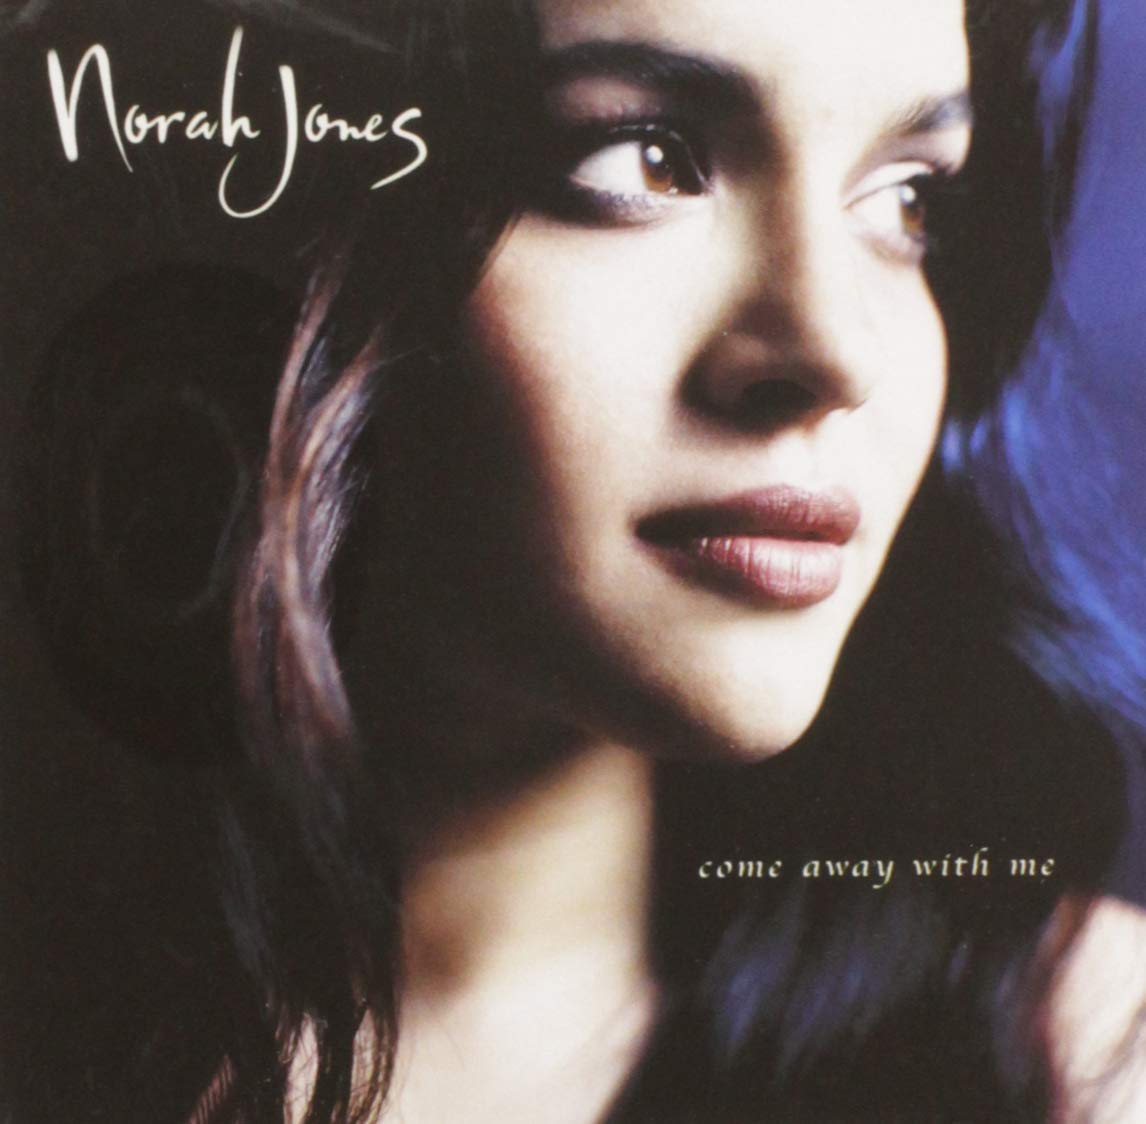 Image credit Norah Jones "Come Away With Me" album cover.